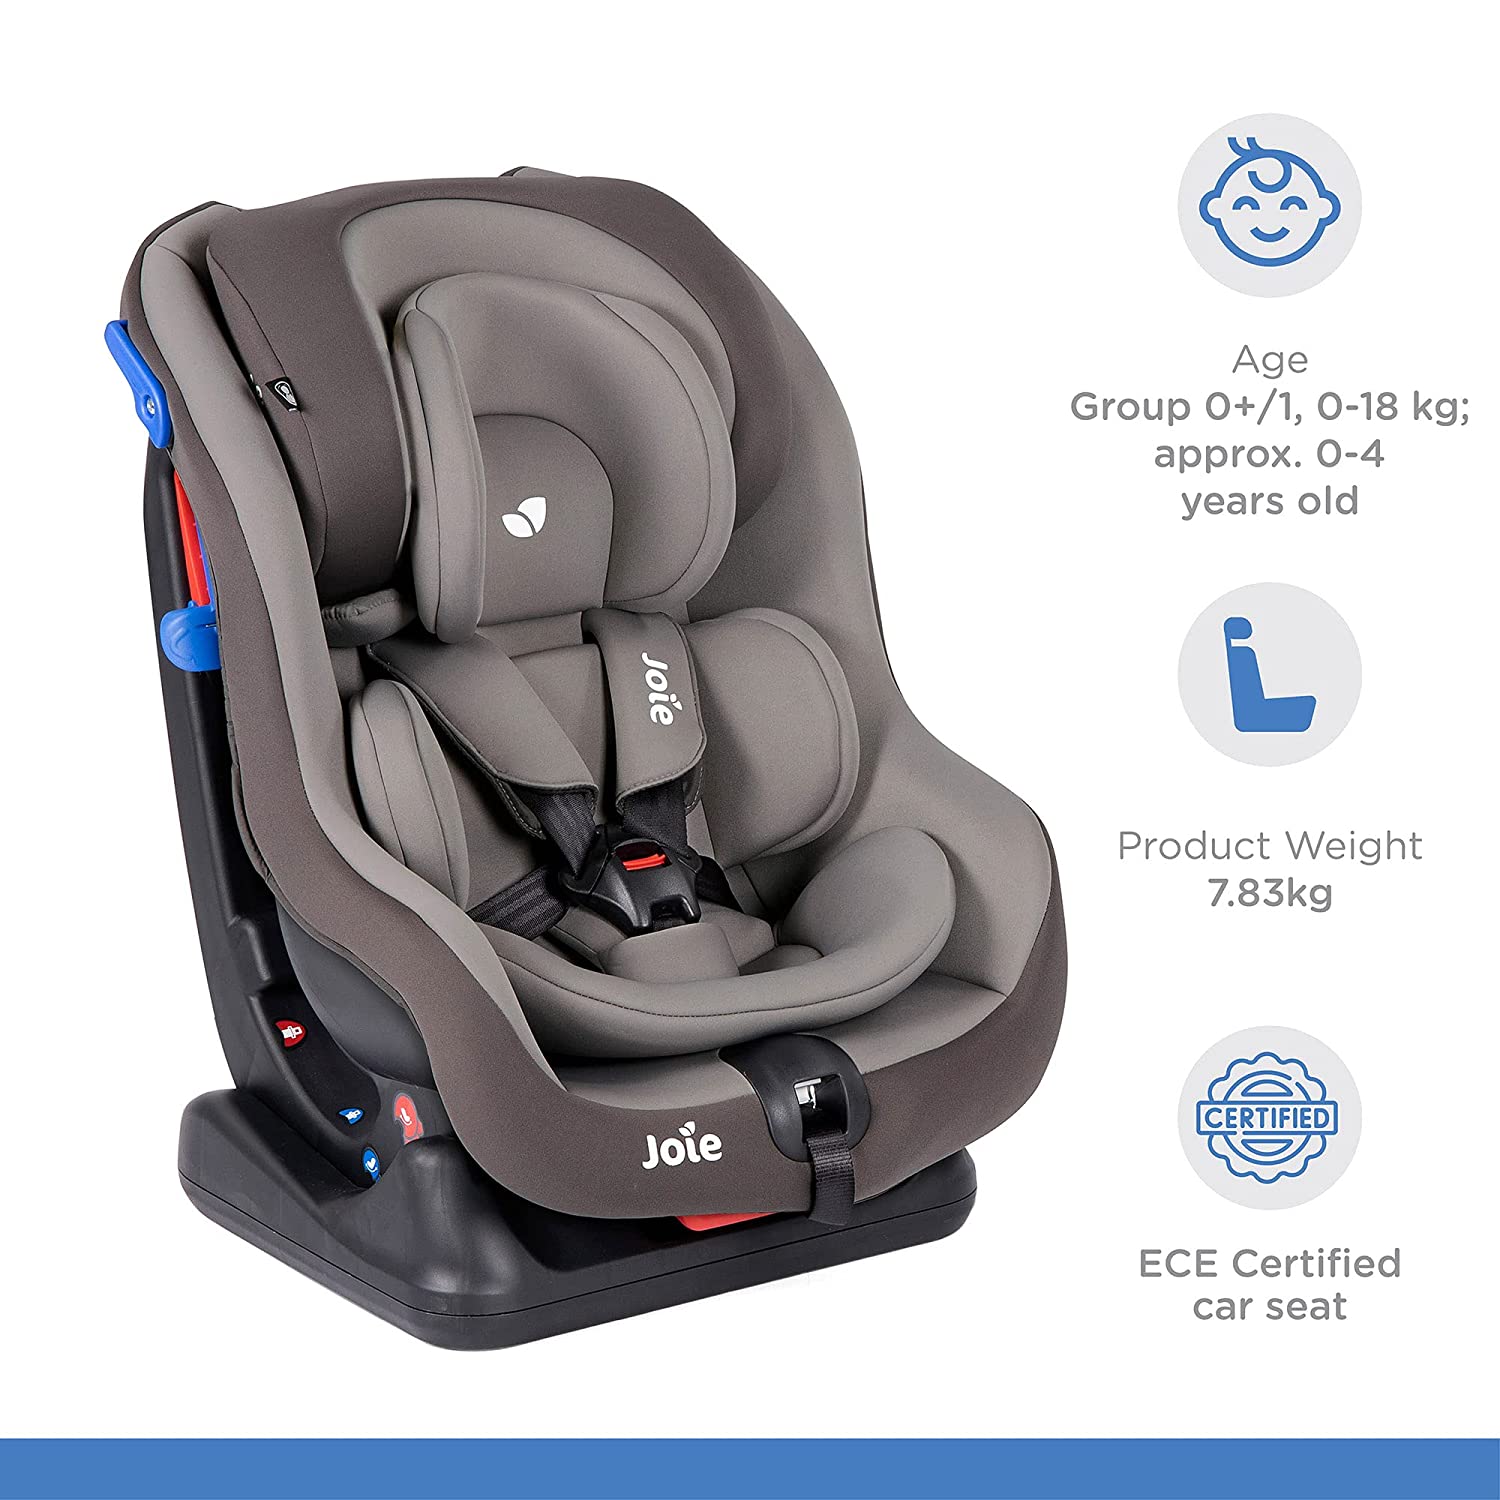 Joie Steadi Infant Car Seat reviews in 2023